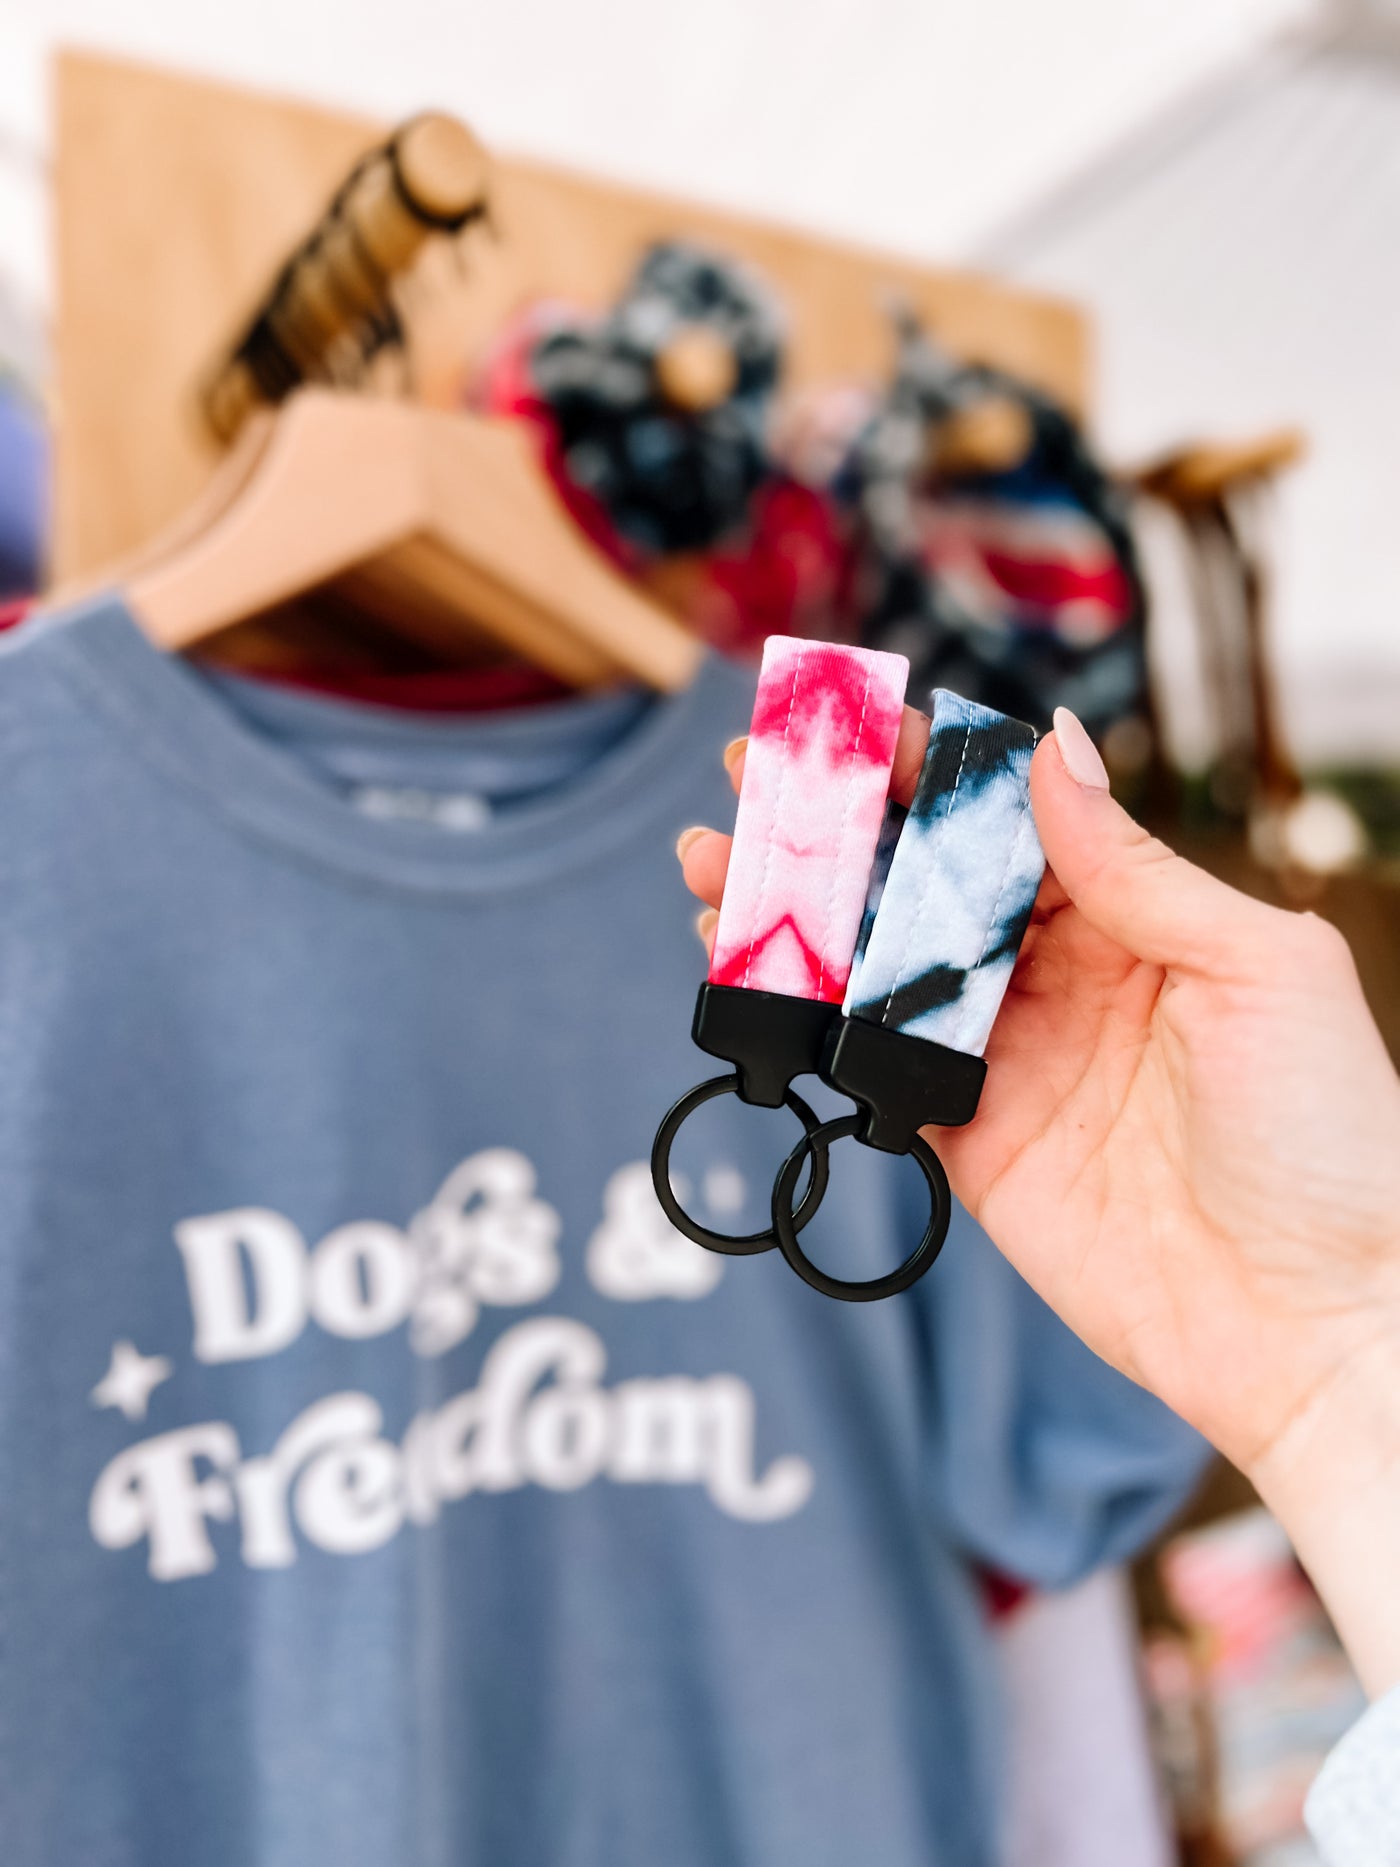 Dogs and Freedom Tee